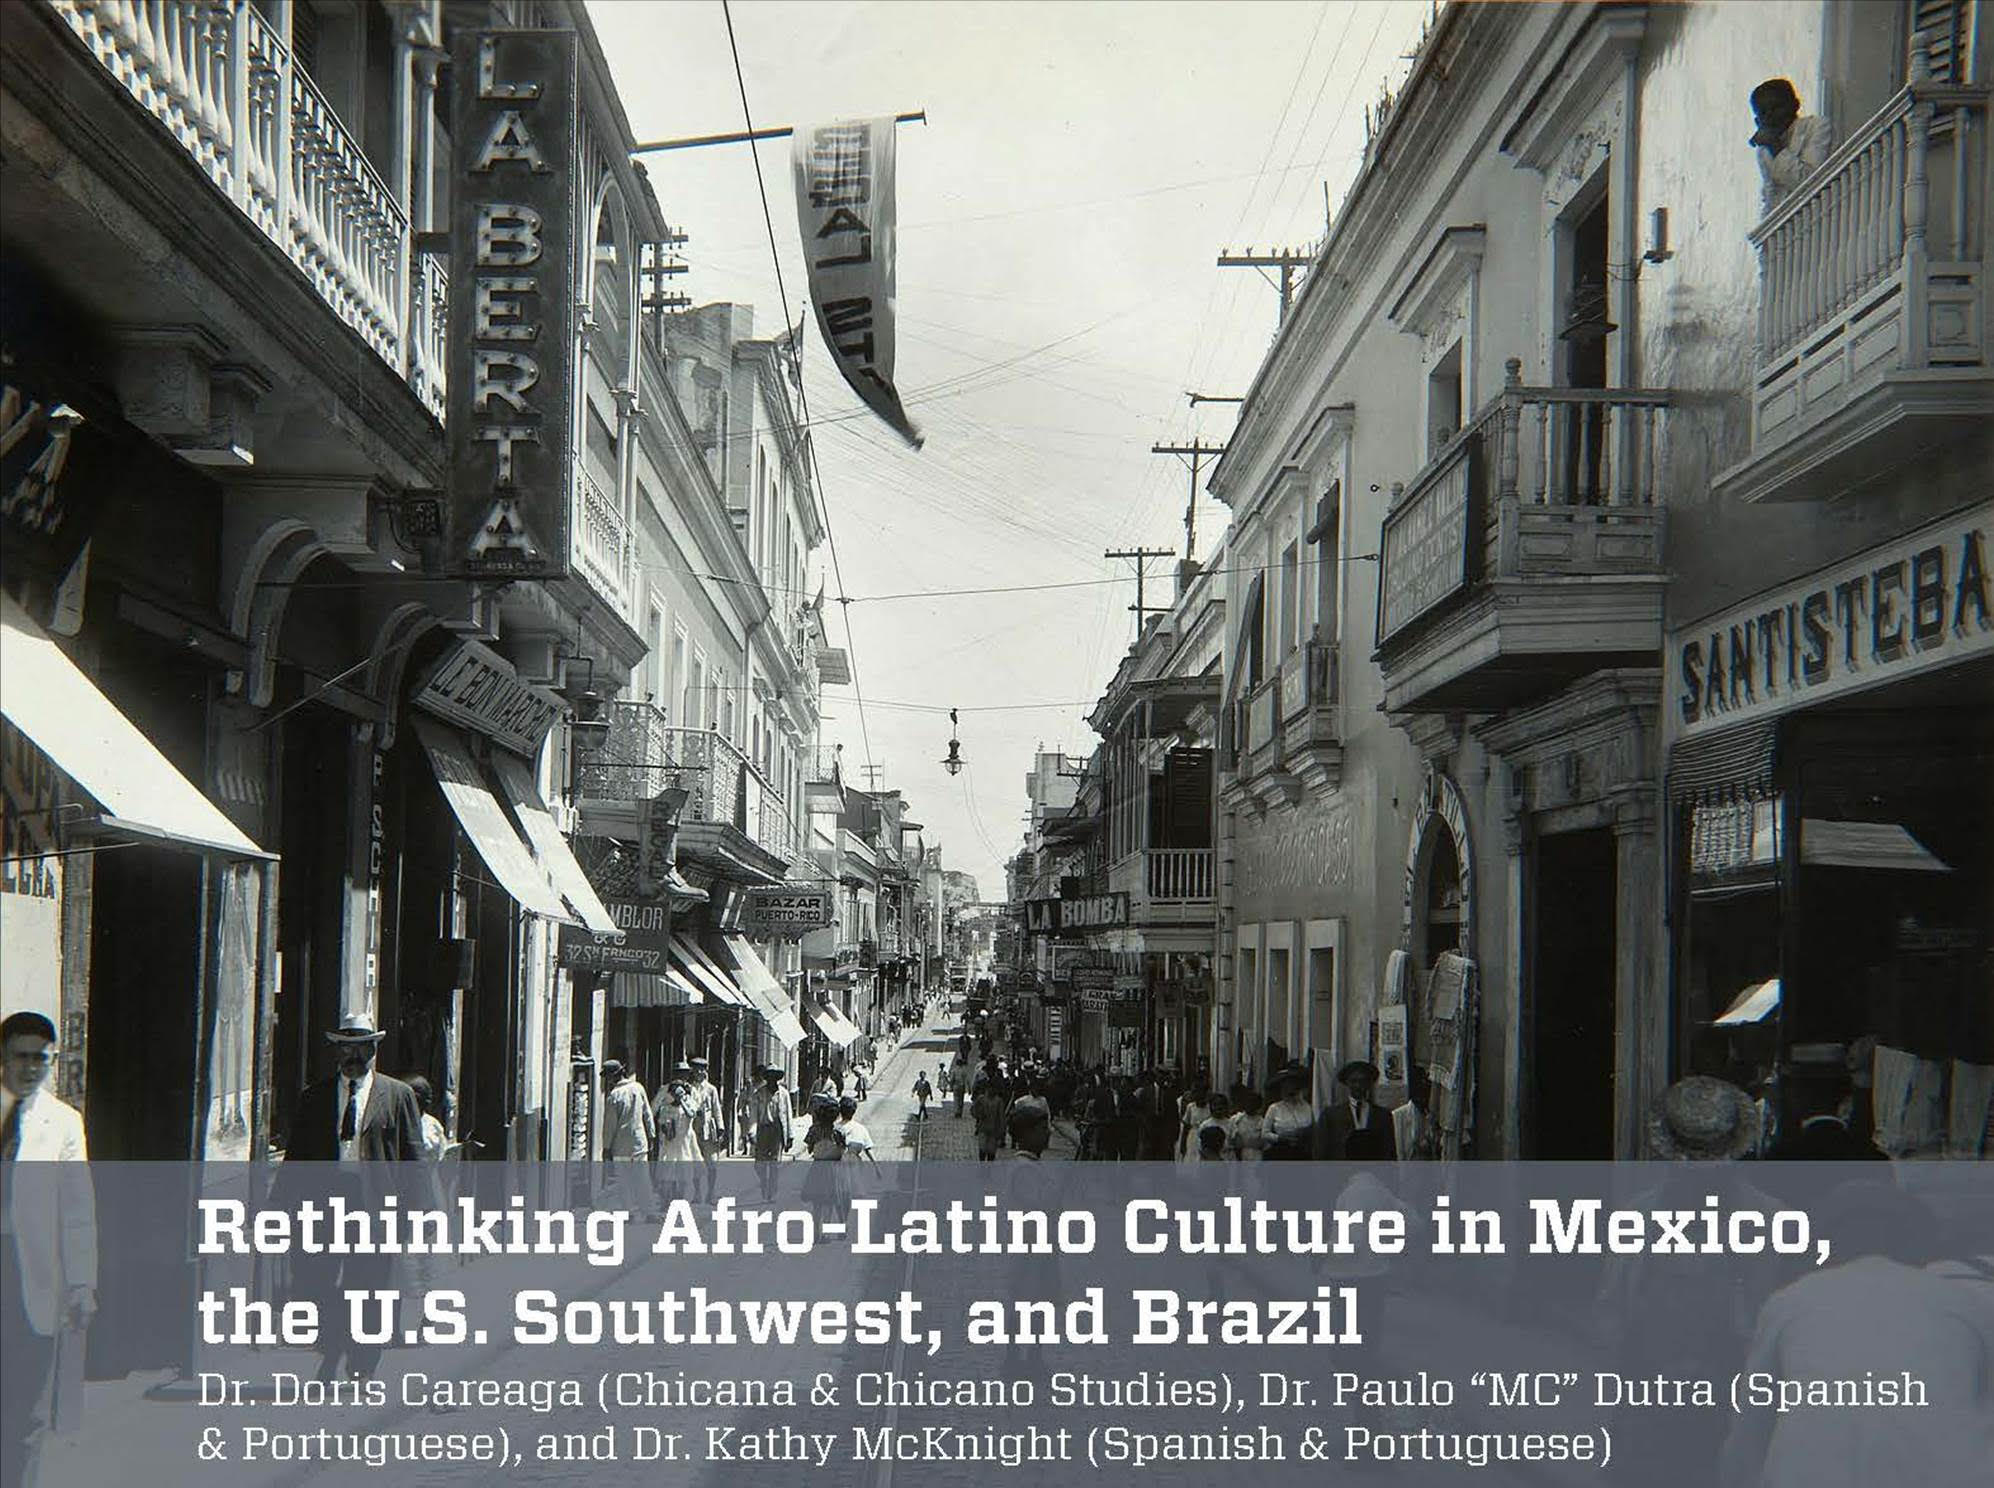 Rethinking Afro-Latino culture in Mexico [article image]